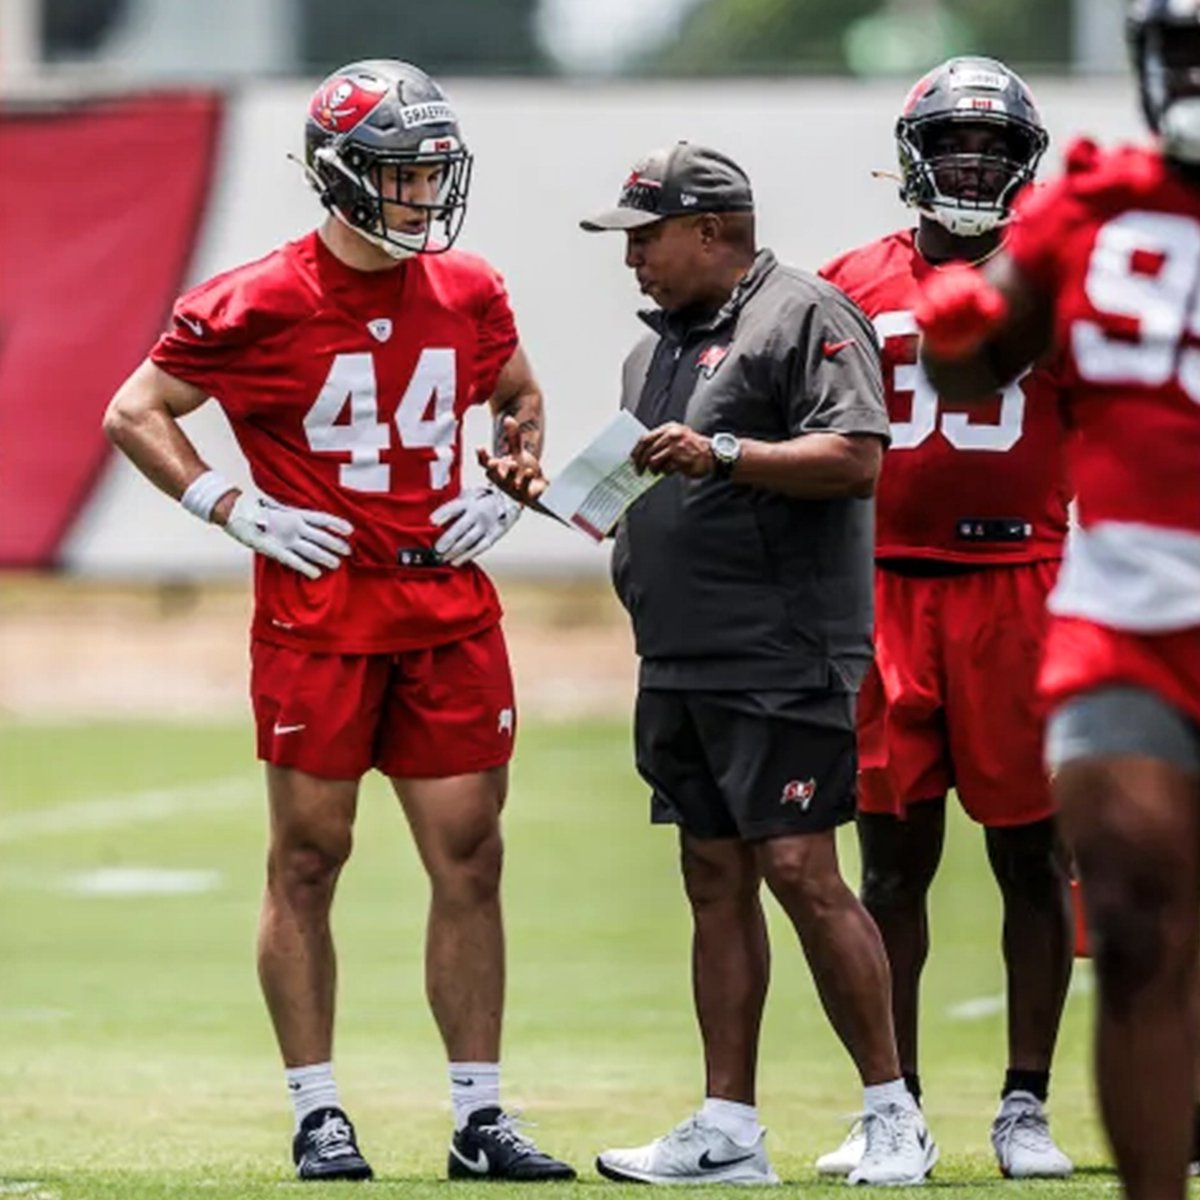 Billy Shaeffer putting in work down in Tampa 💪 📸 Photo Credit: Tori Richman/Tampa Bay Buccaneers #RollPards